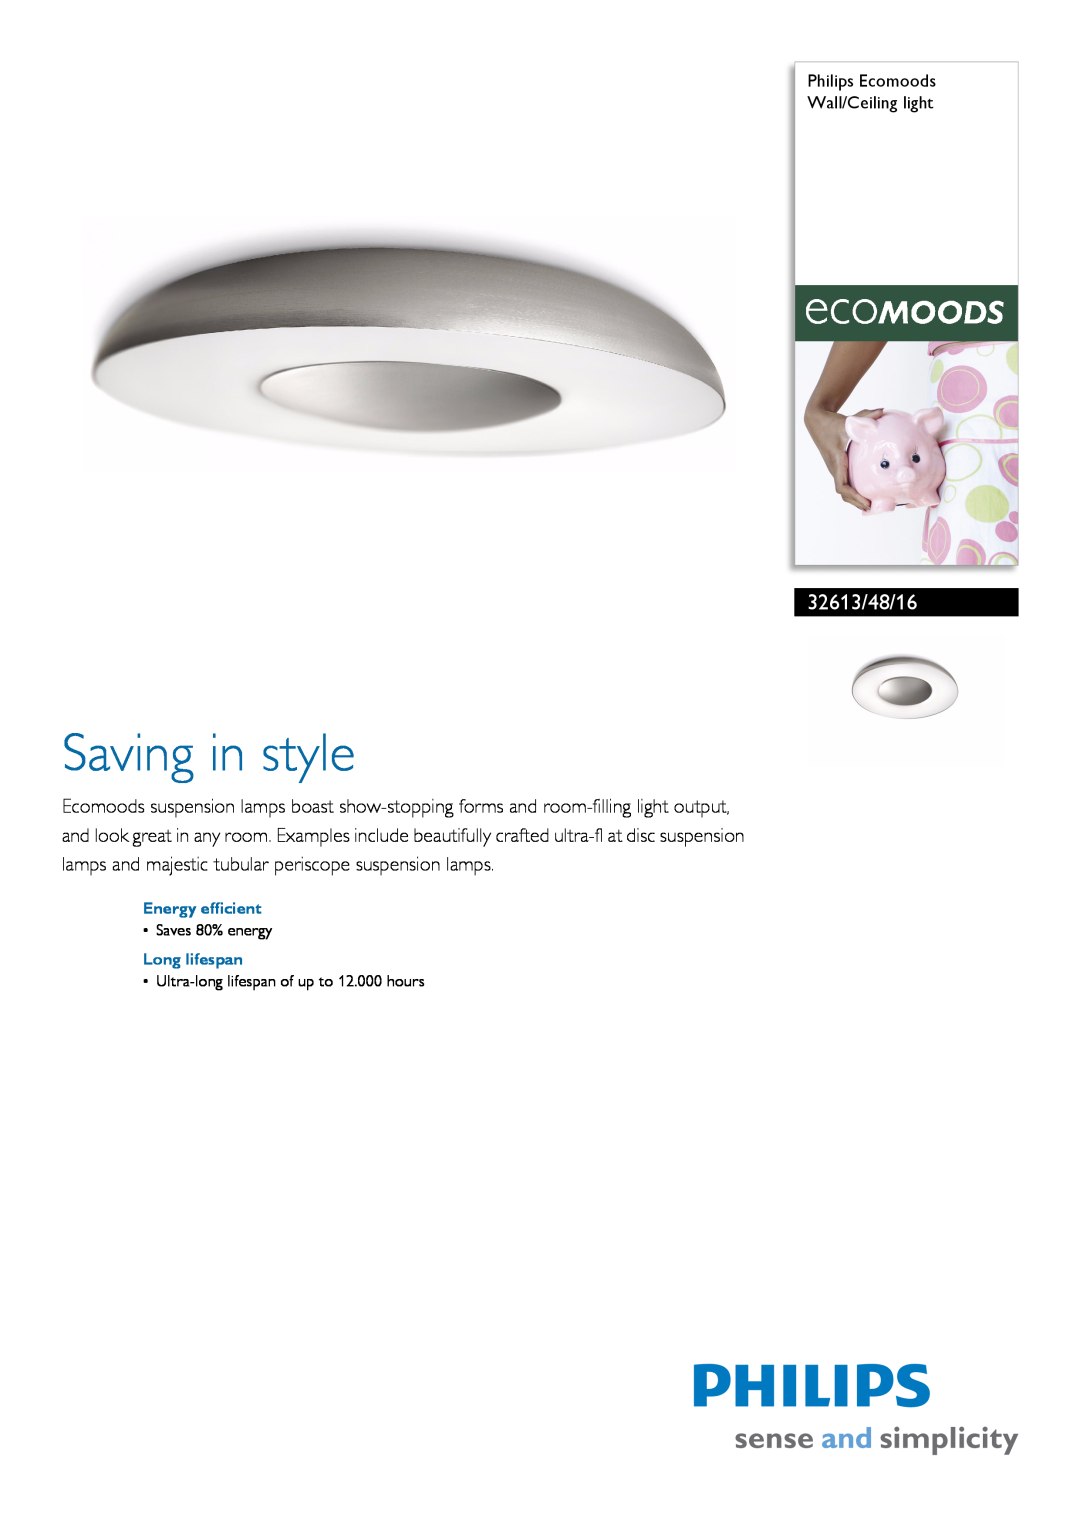 Philips 32613/48/16 manual Philips Ecomoods Wall/Ceiling light, Energy efficient, Long lifespan, Saving in style 